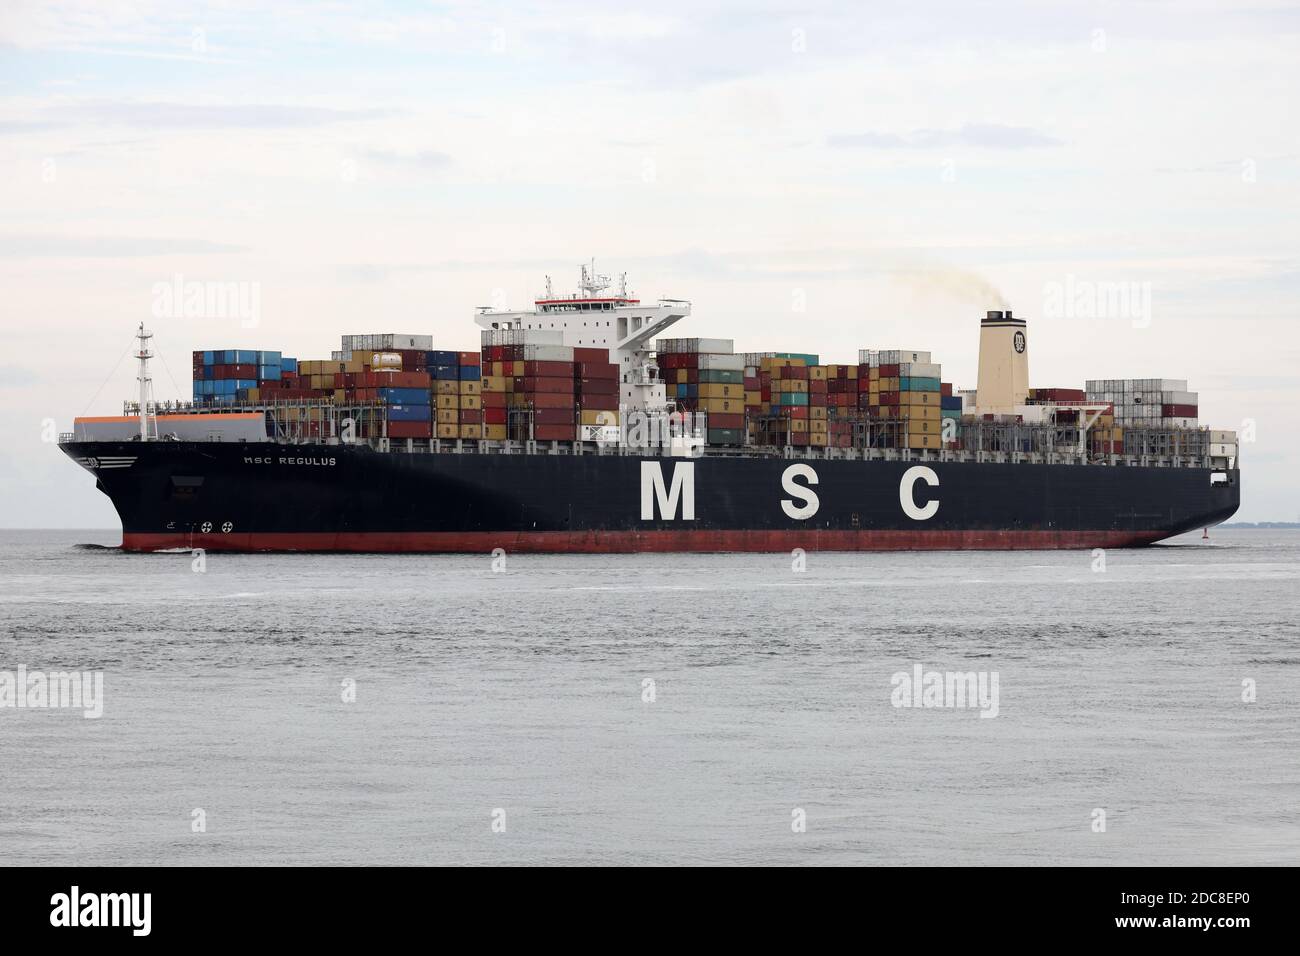 The container ship MSC Regulus will pass the city of Cuxhaven on the river Elbe on August 20, 2020 on its way to the North Sea. Stock Photo